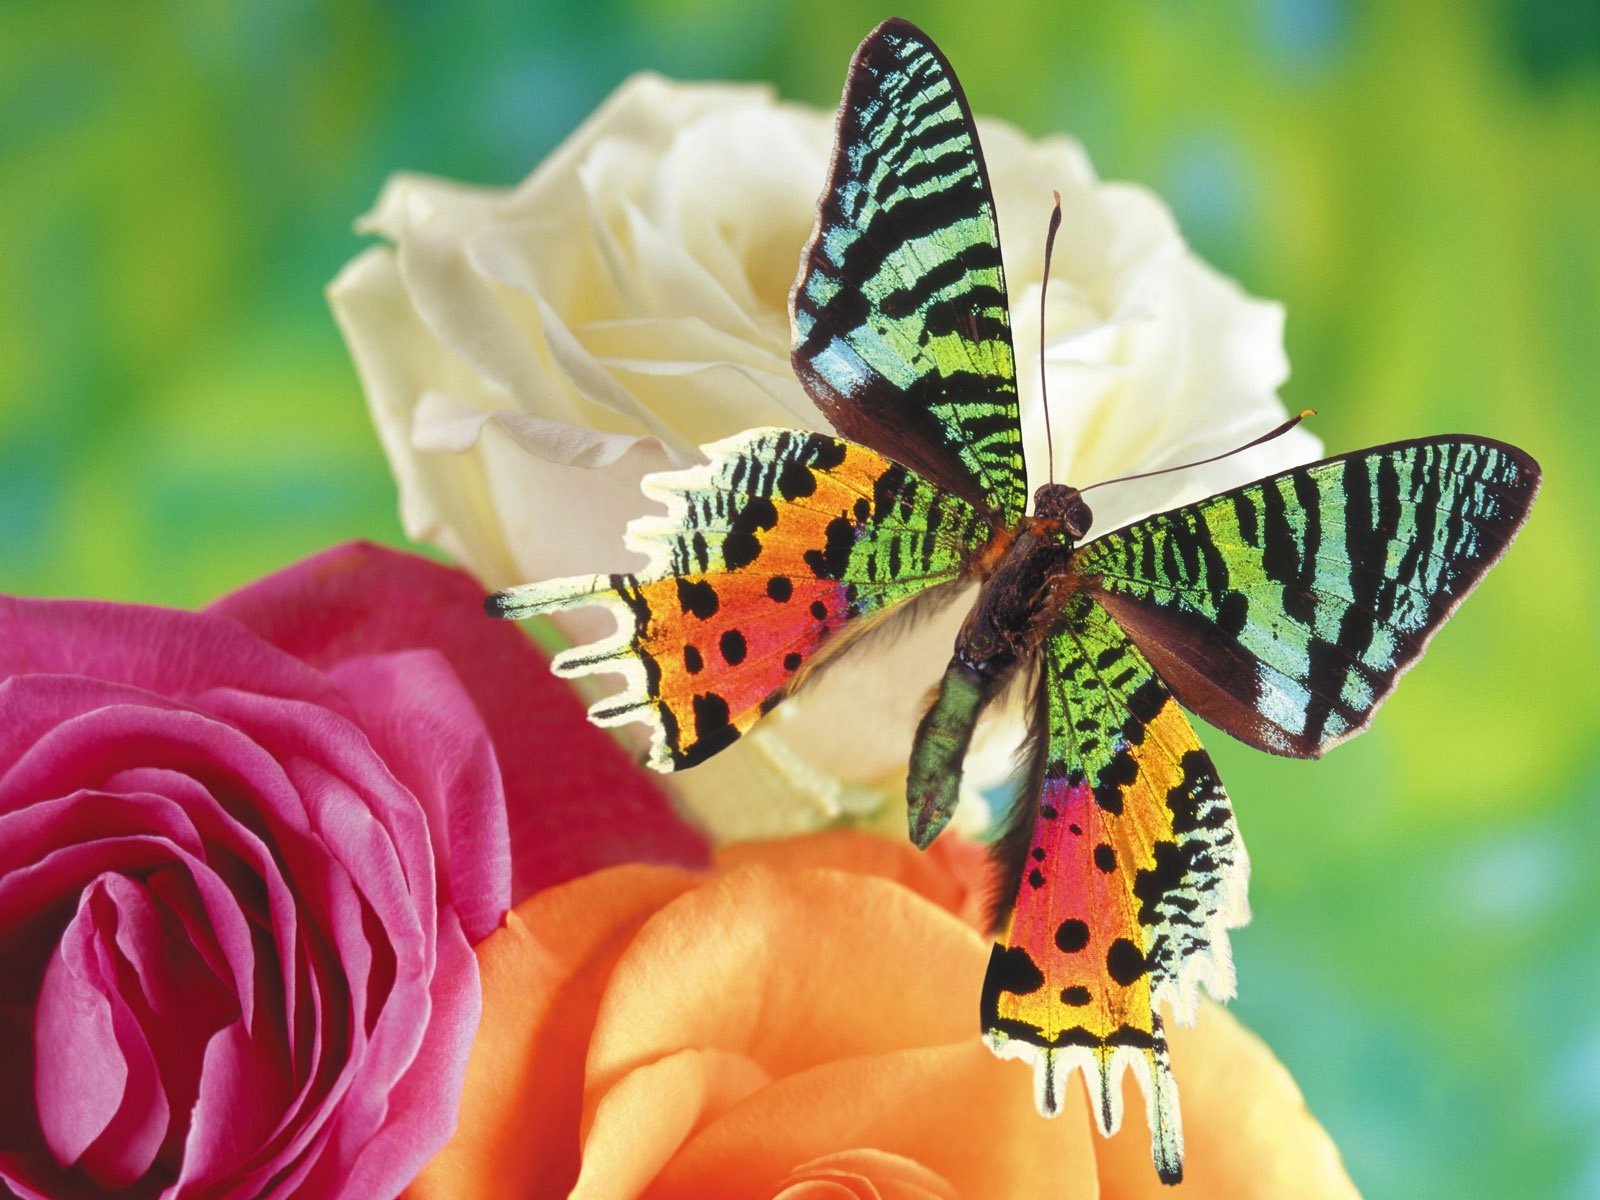 Rainbow Butterfly Images Browse 32562 Stock Photos  Vectors Free  Download with Trial  Shutterstock